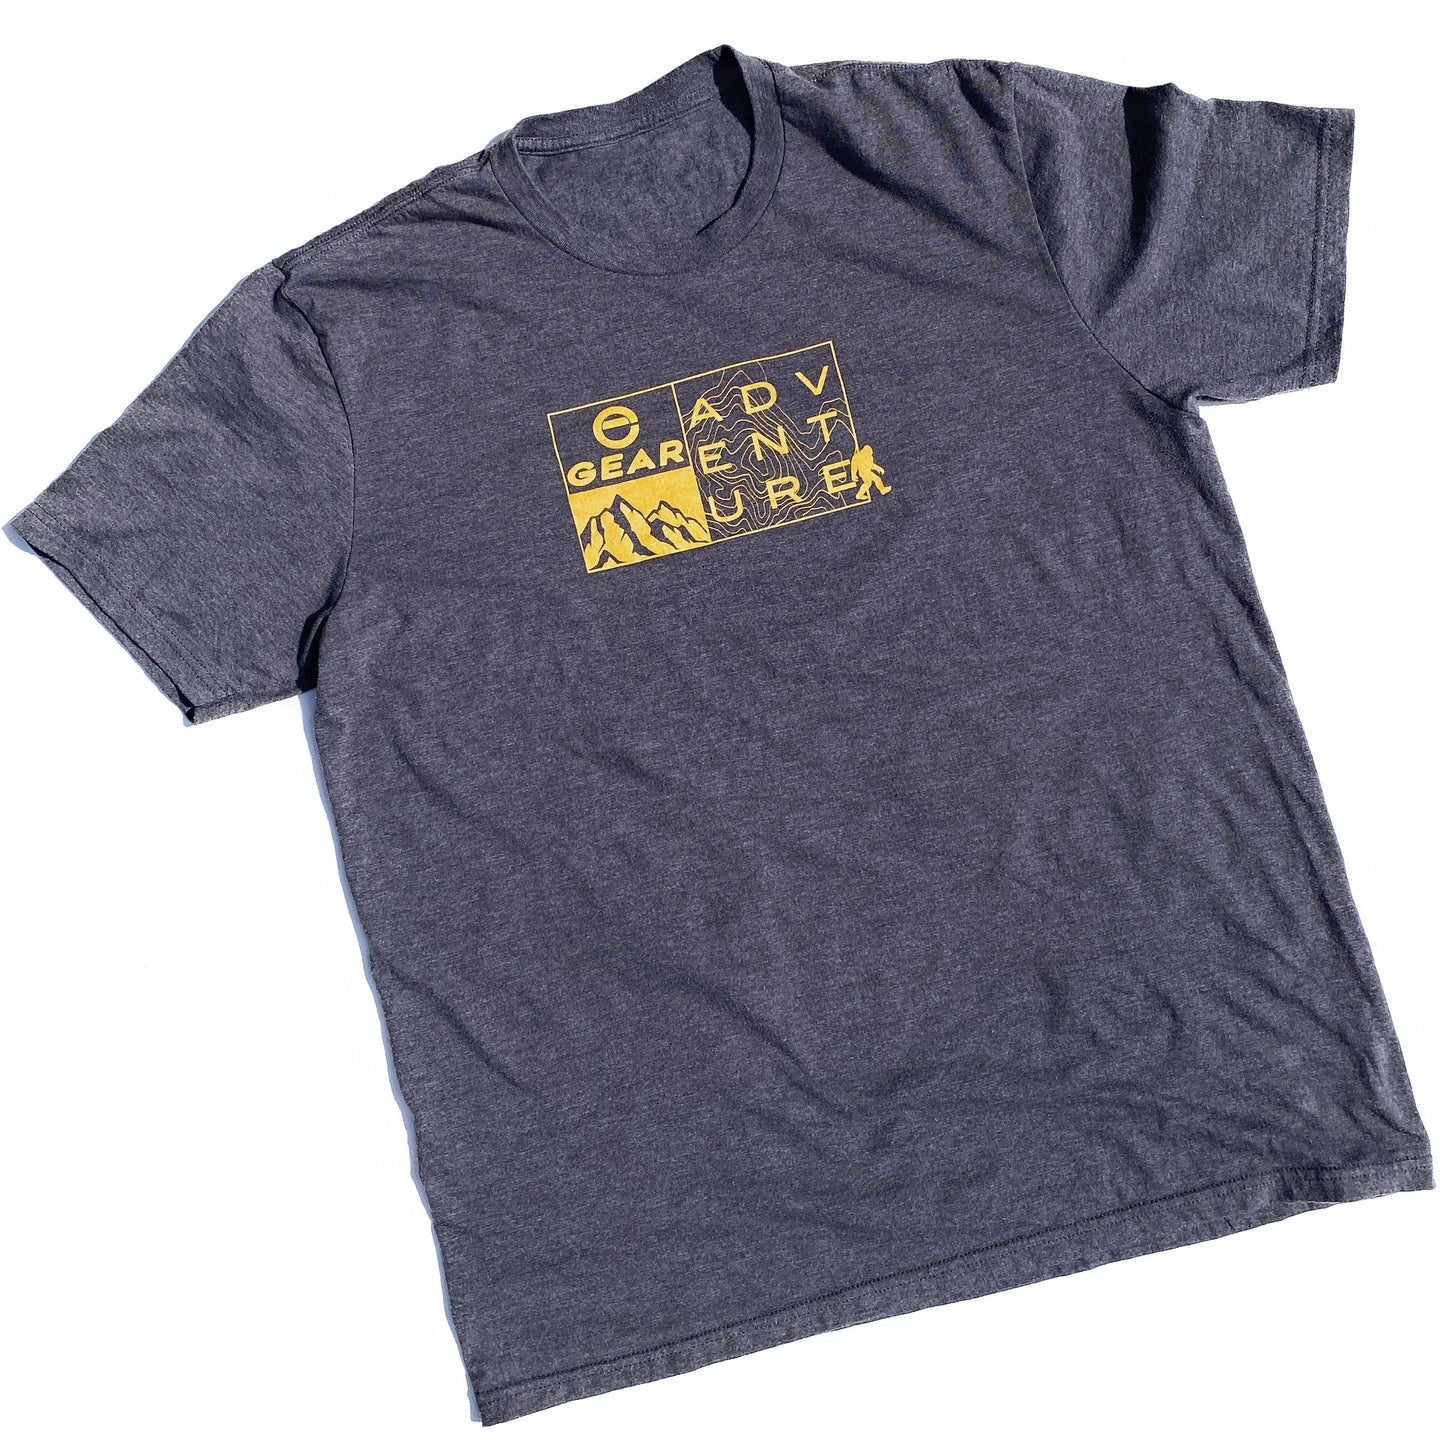 Enthusiast Gear Outdoor Adventure Tri-Blend T-Shirt Heathered Charcoal